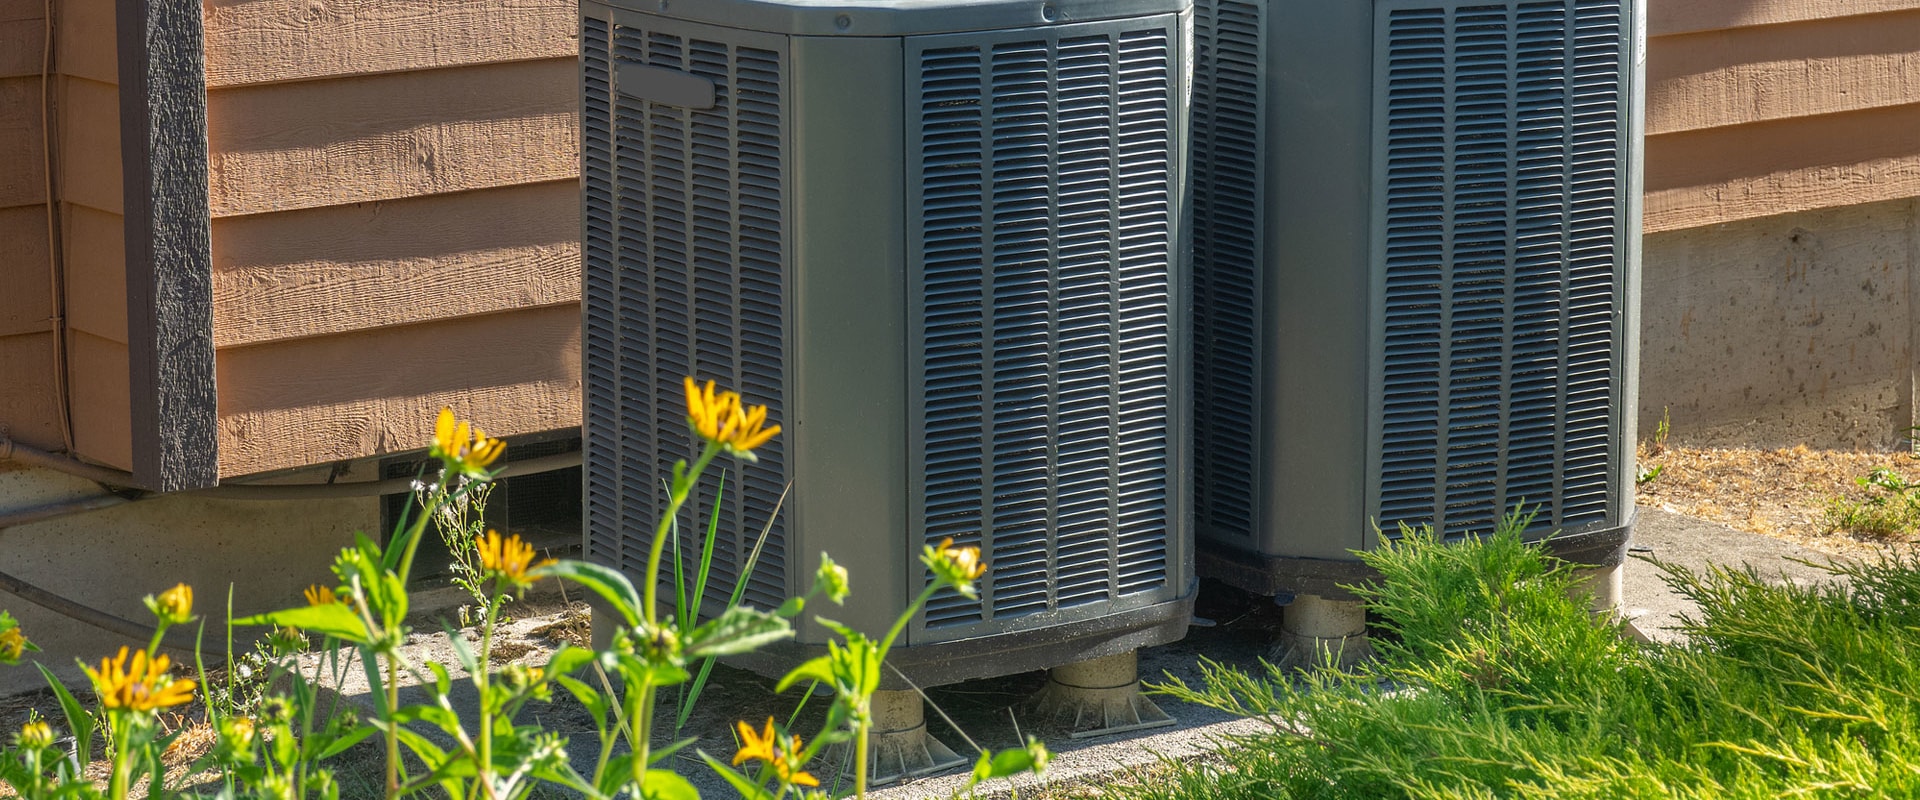 How to Find the Best HVAC Maintenance Companies: Online Reviews and Ratings